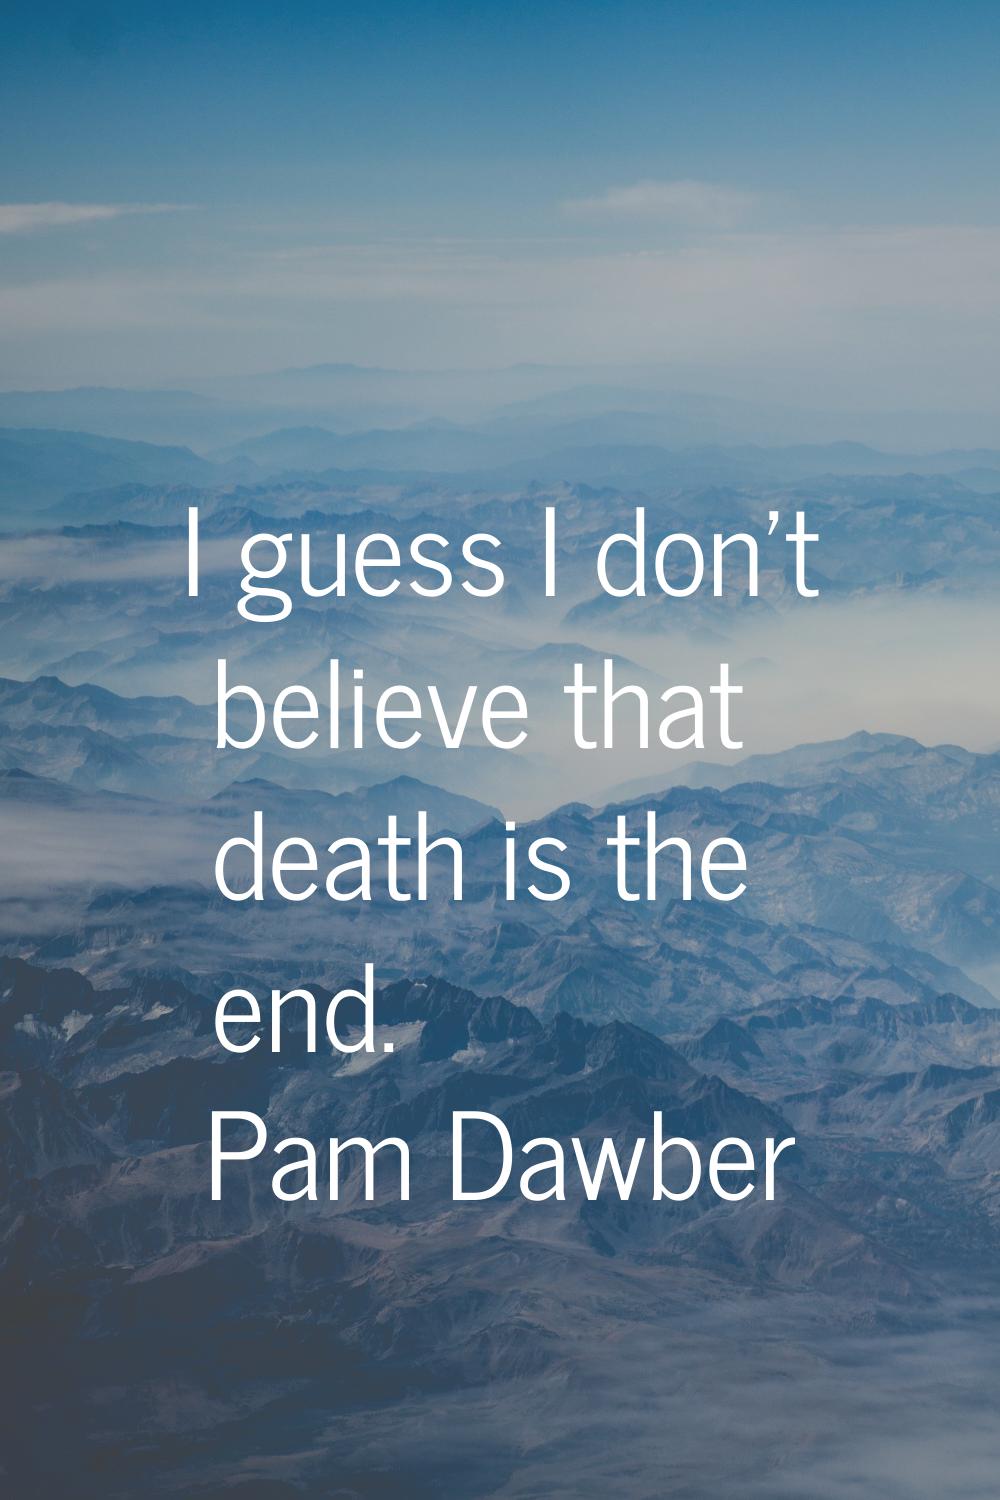 I guess I don't believe that death is the end.